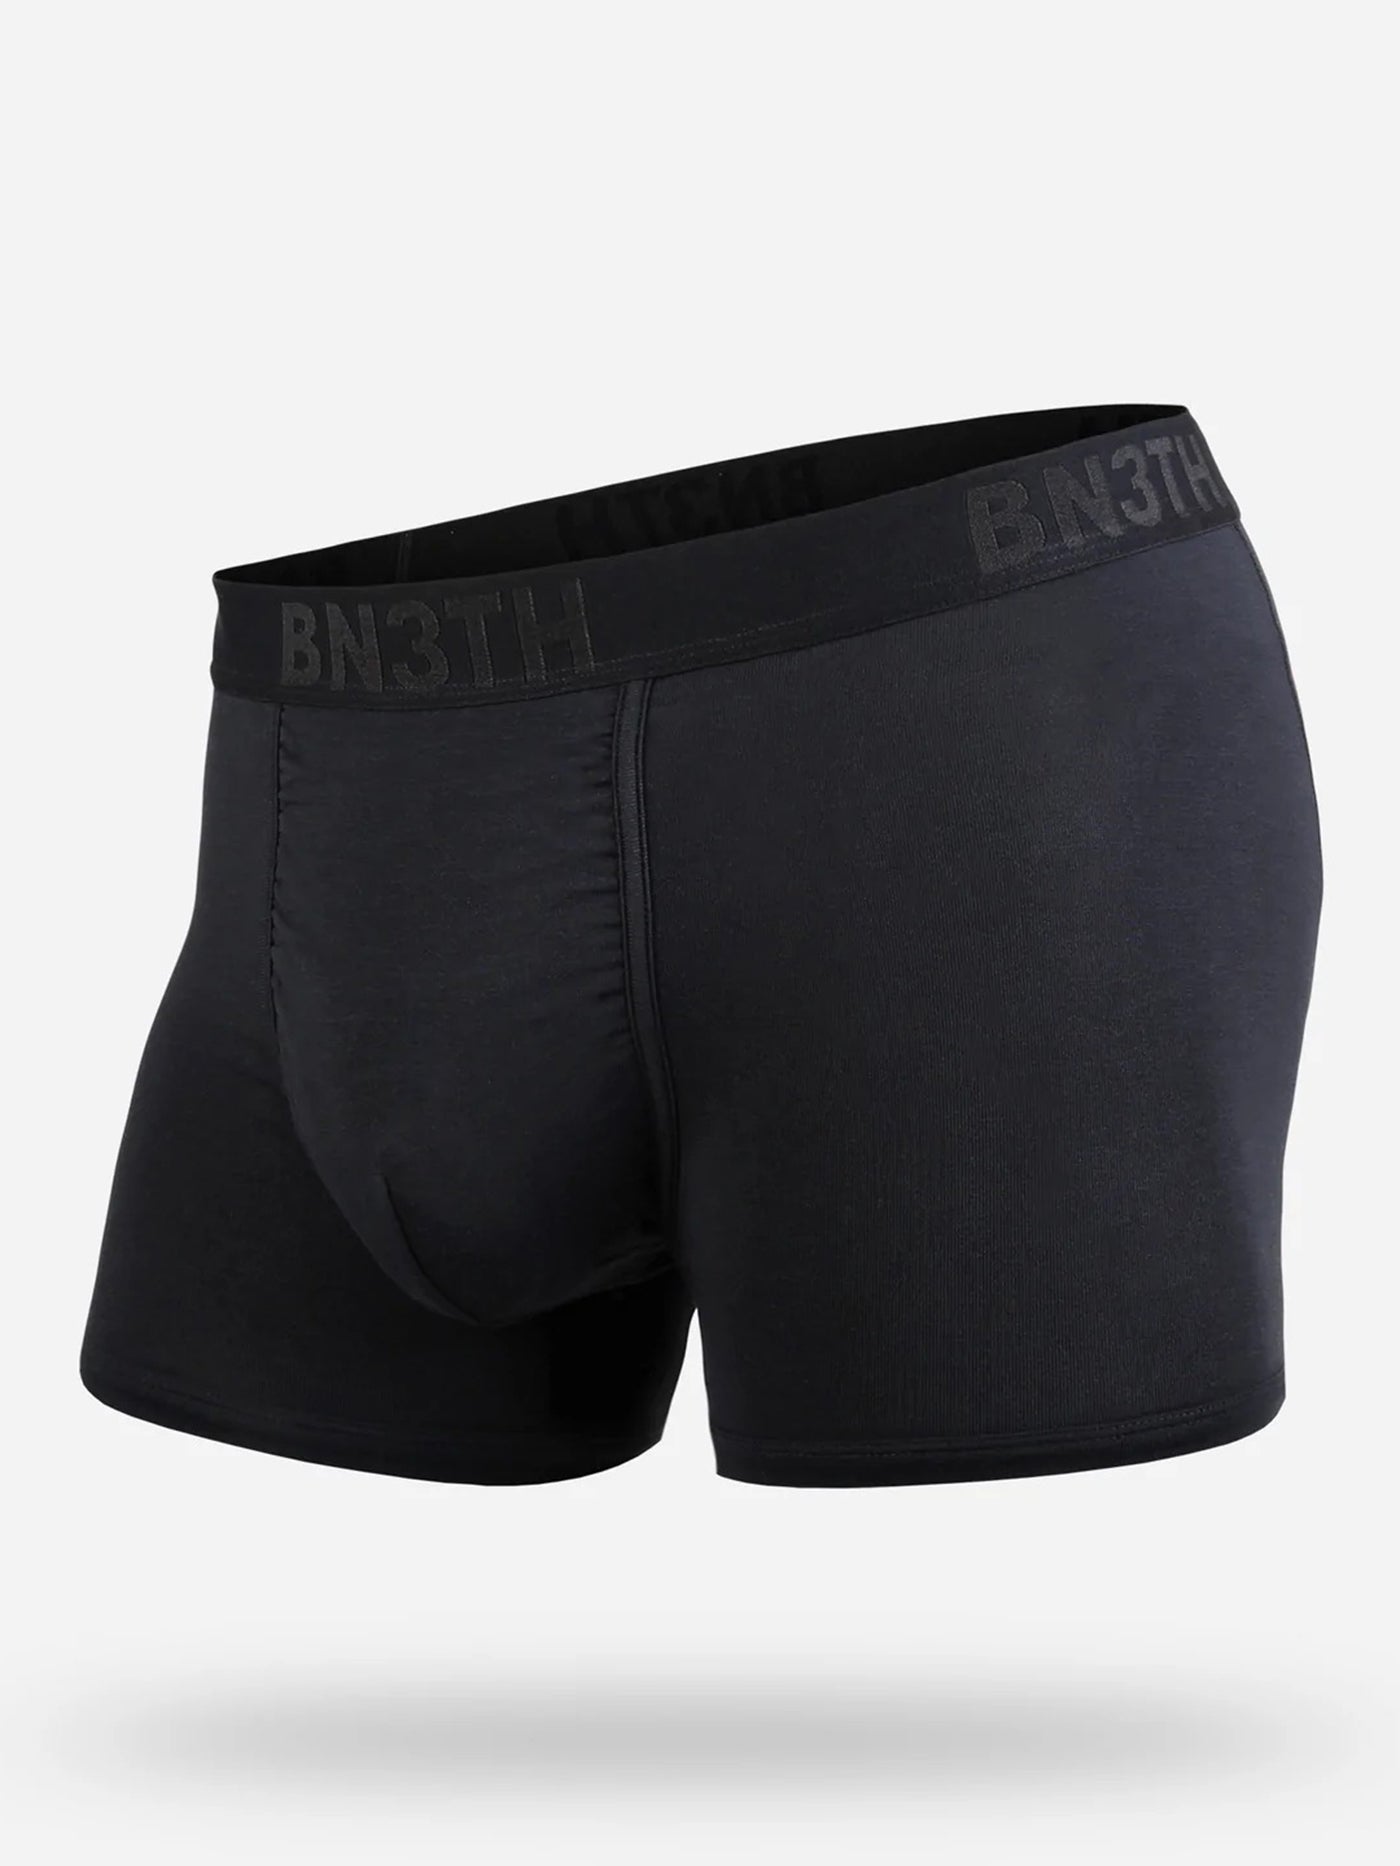 Bn3th Classic Trunk Solid Black Boxer